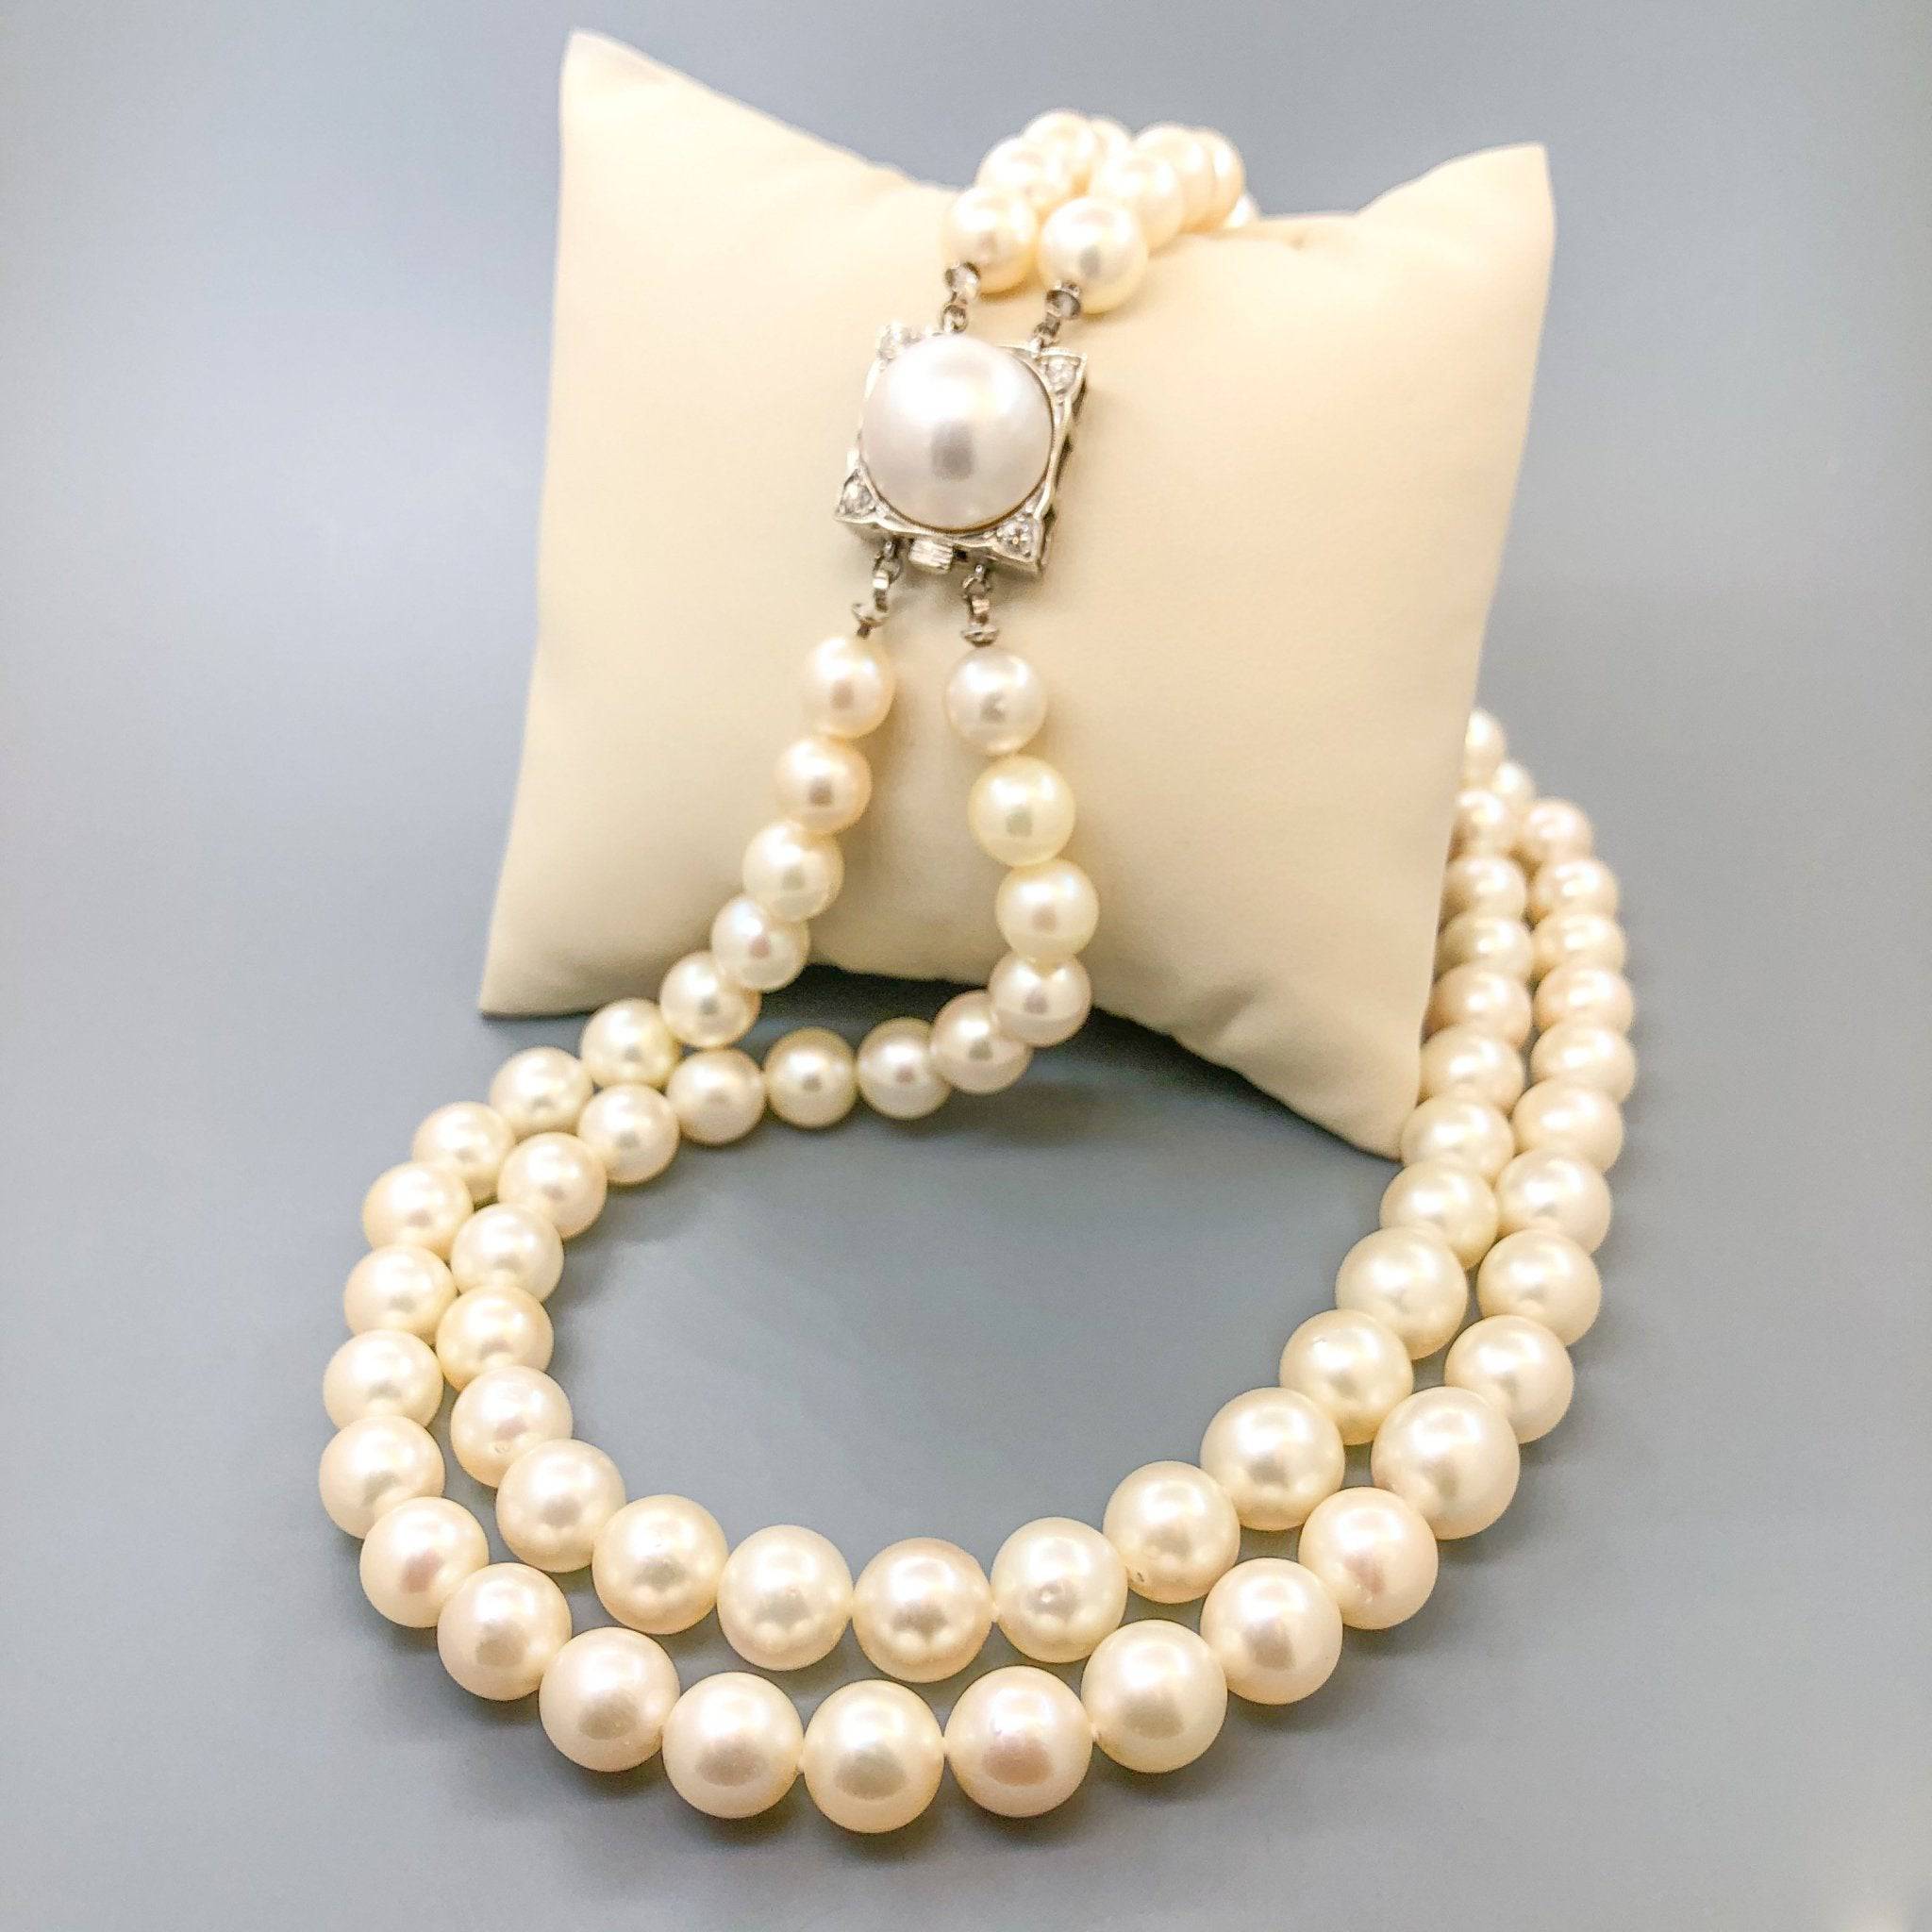 Estate 14K W Gold 16 8-10mm Double Strand Mabe Cultured Pearl Necklace